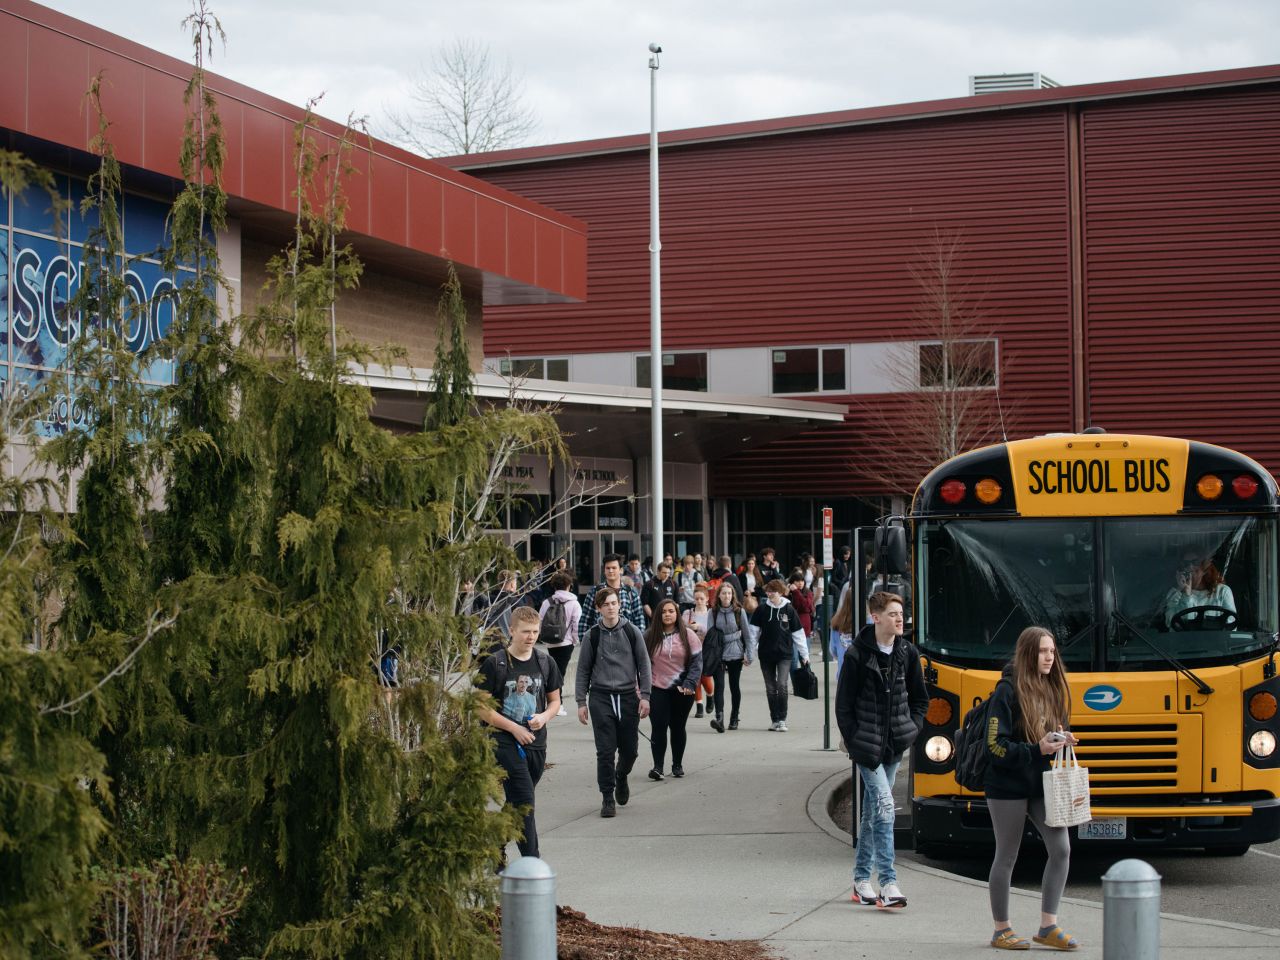 Students leave Glacier Peak High School in Snohomish, Washington, on March 12. Beginning the following day, schools in the Snohomish school district planned to be closed through April 24.